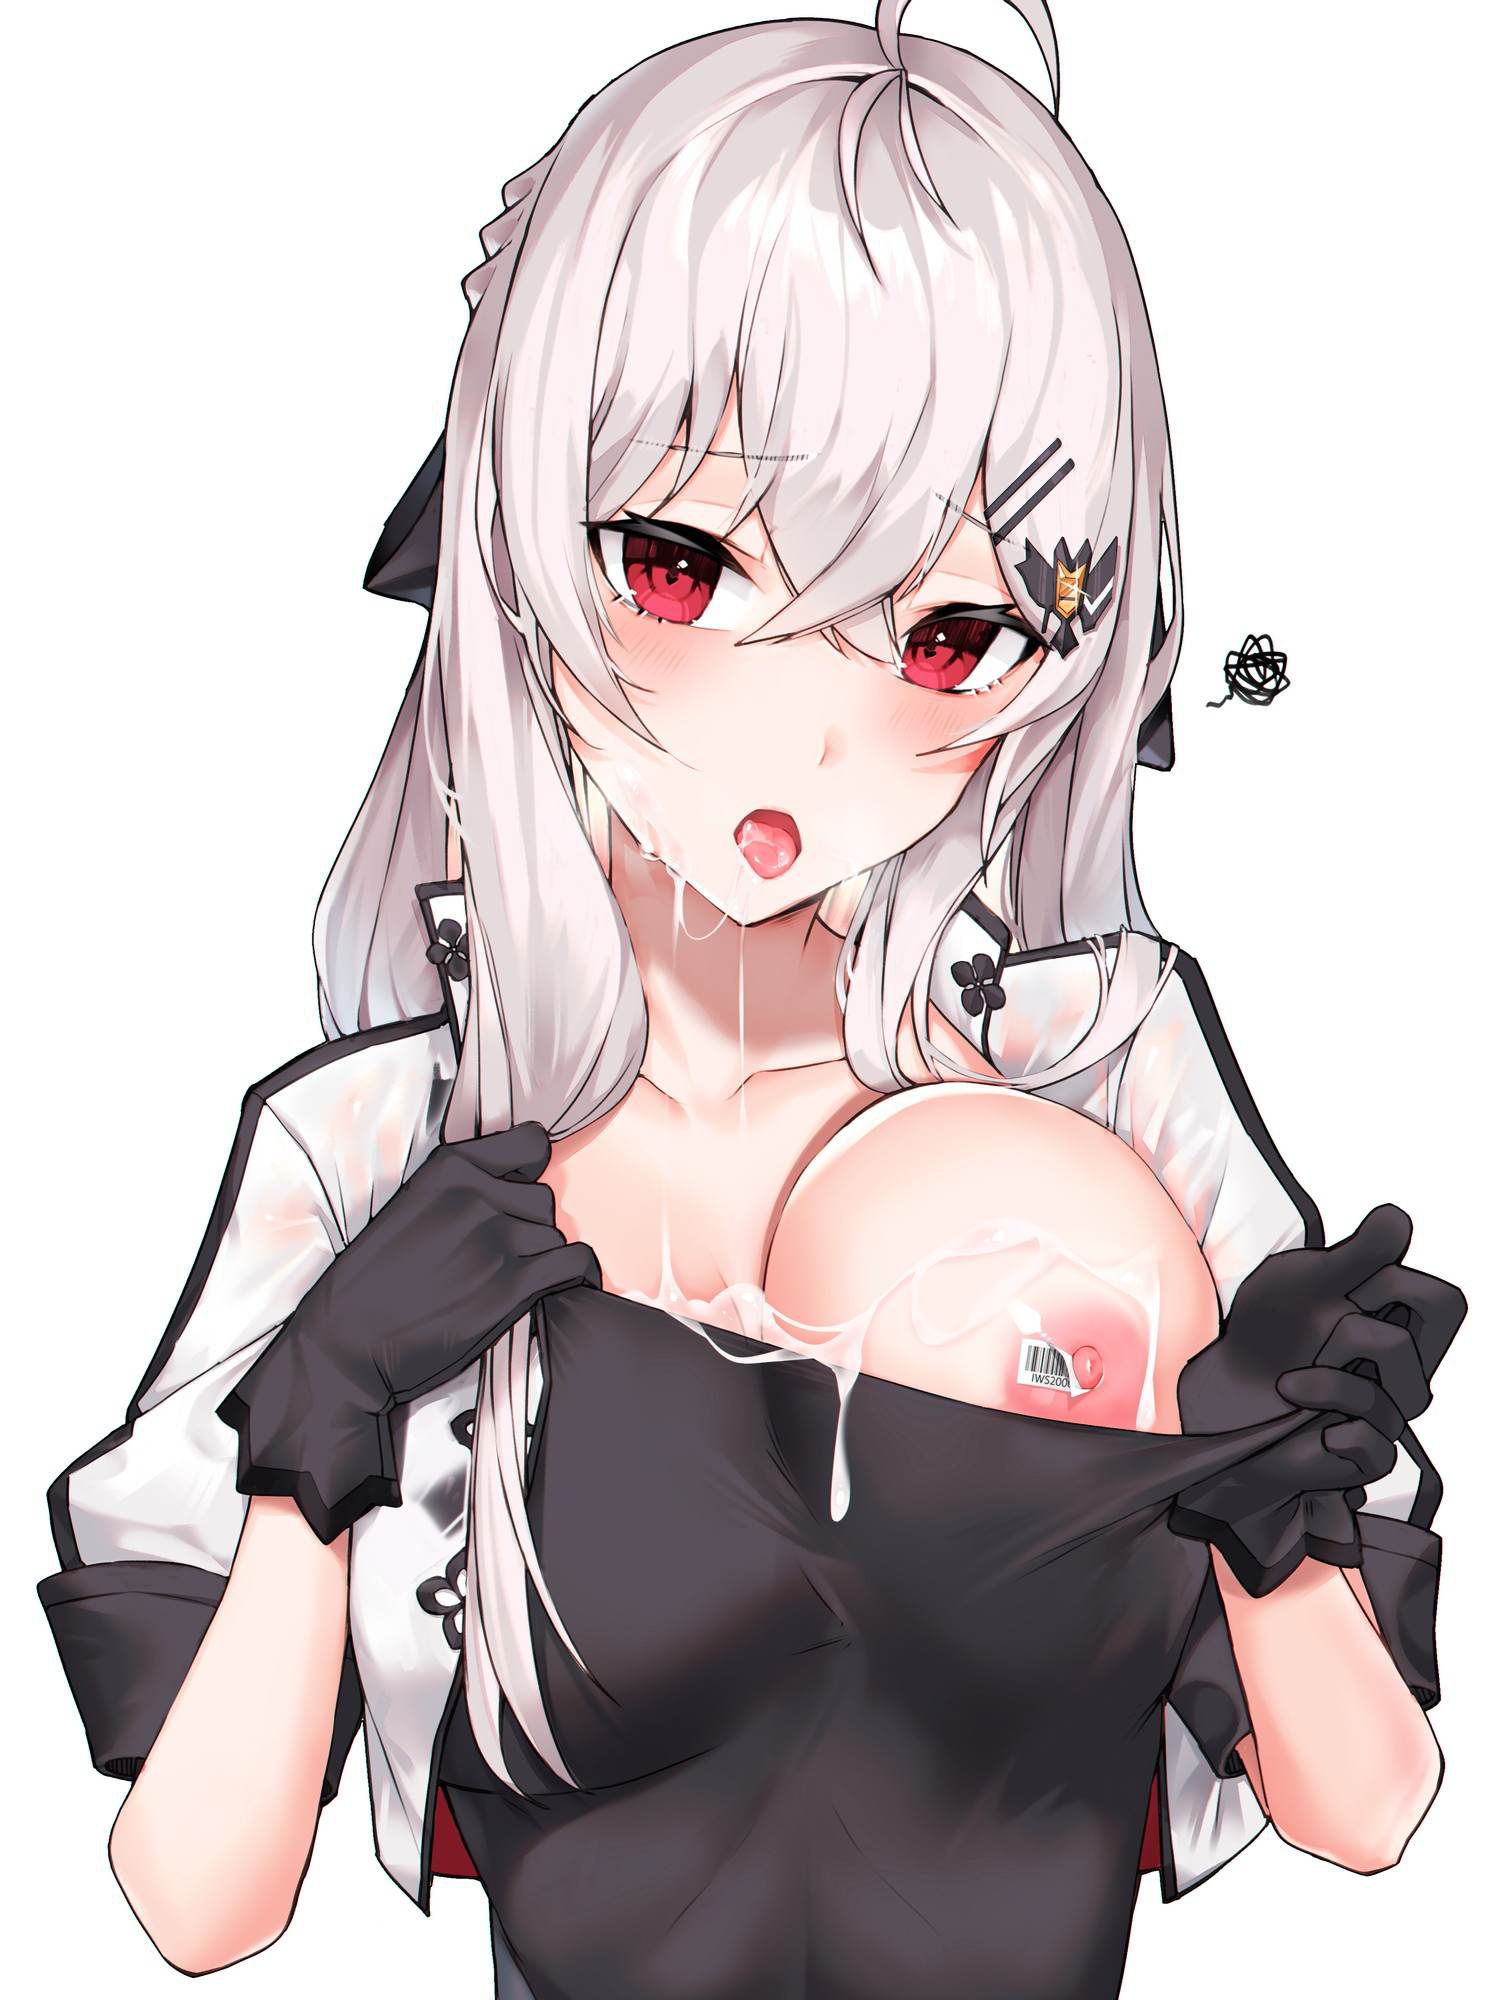 IWS2000's erotic secondary erotic images are full of boobs! [Dolls Frontline] 20